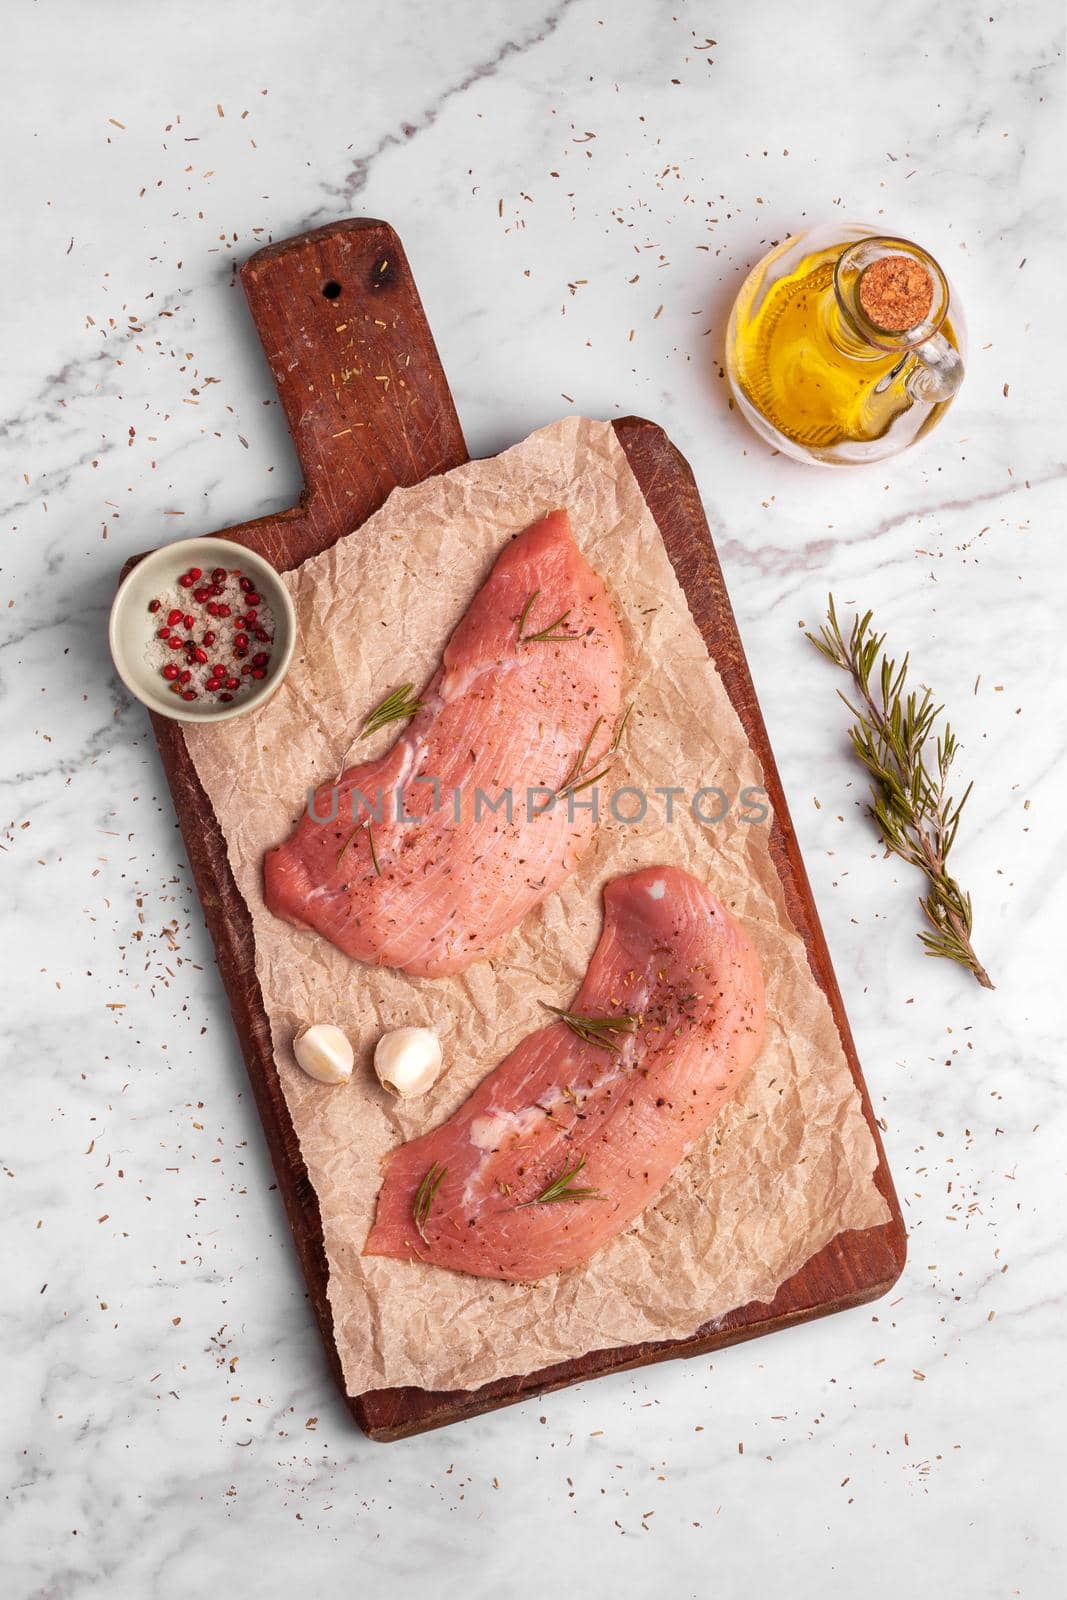 two raw veal escalope on the old wooden cutting board, ready to cook, marbre background, top view,